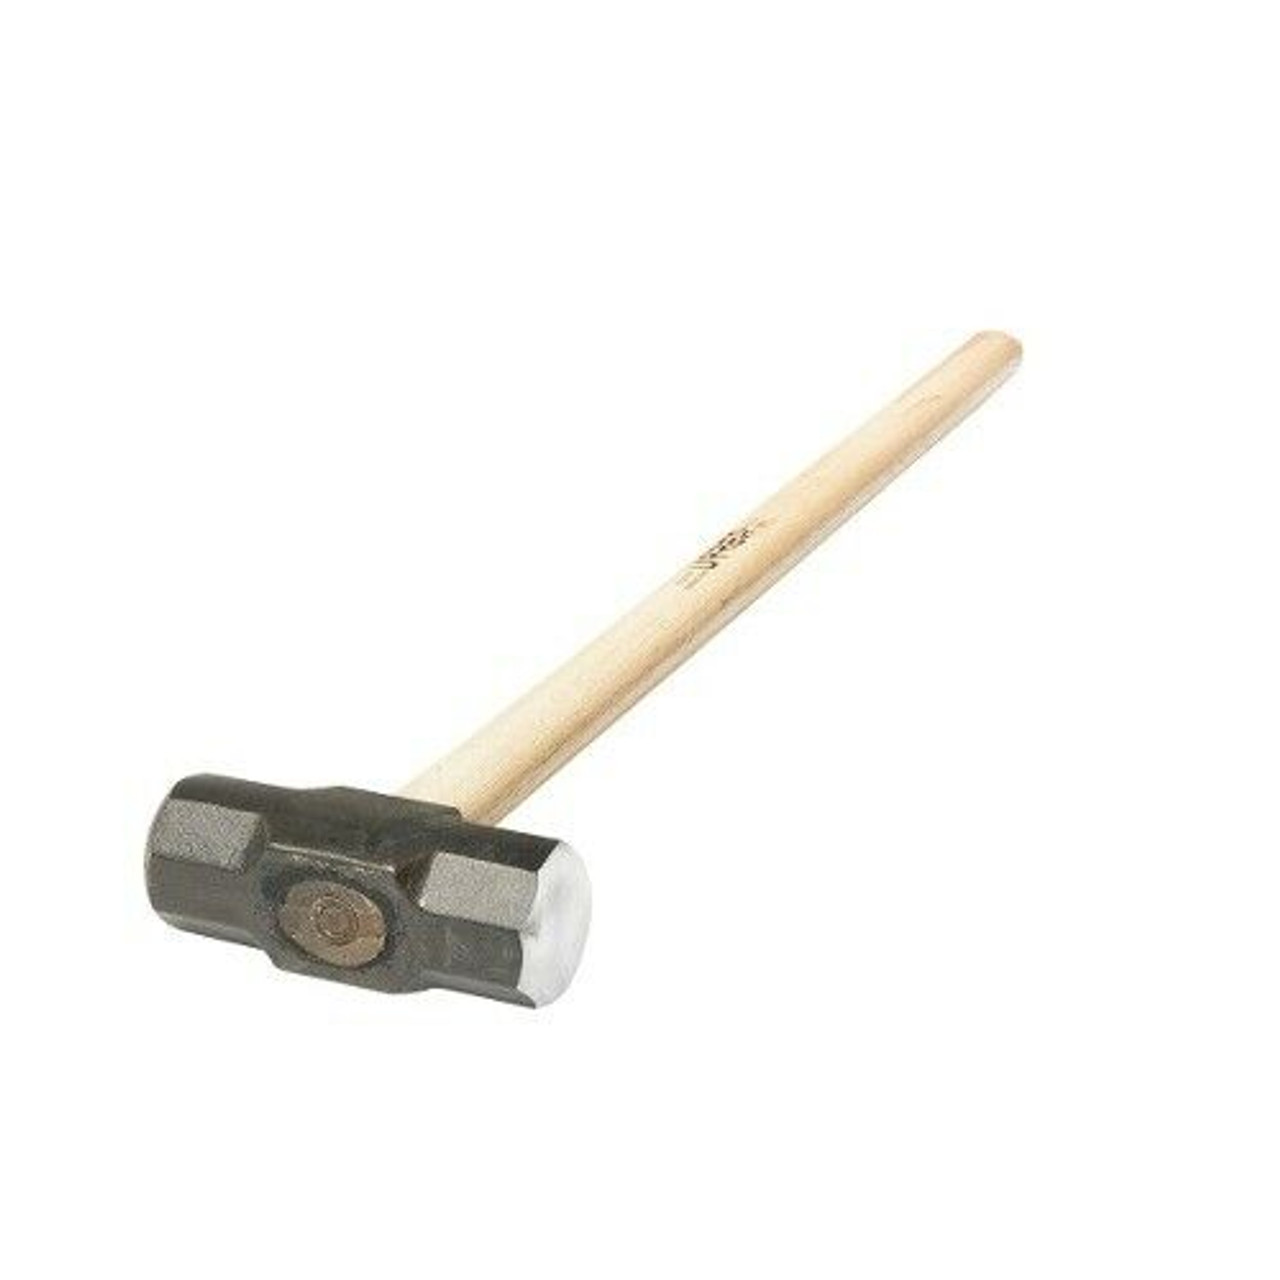 Machined Octagonal Head Sledge Hammers With 36" Hickory Handle